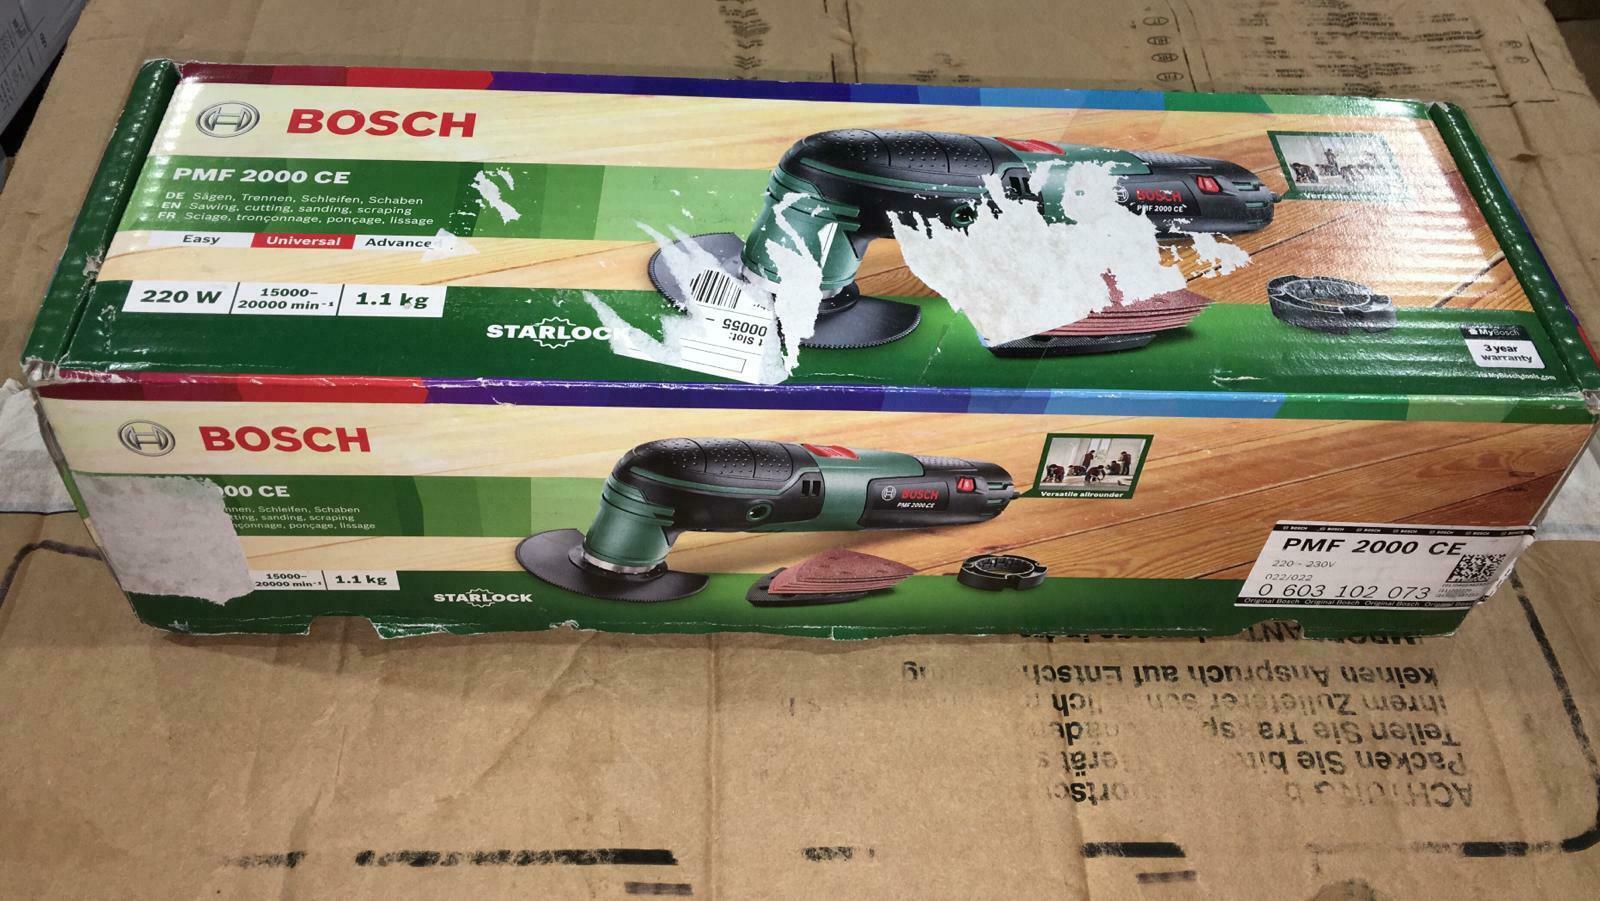 Bosch 240V 220W Corded Multi tool PMF 2000 CE - Used UVG 0591